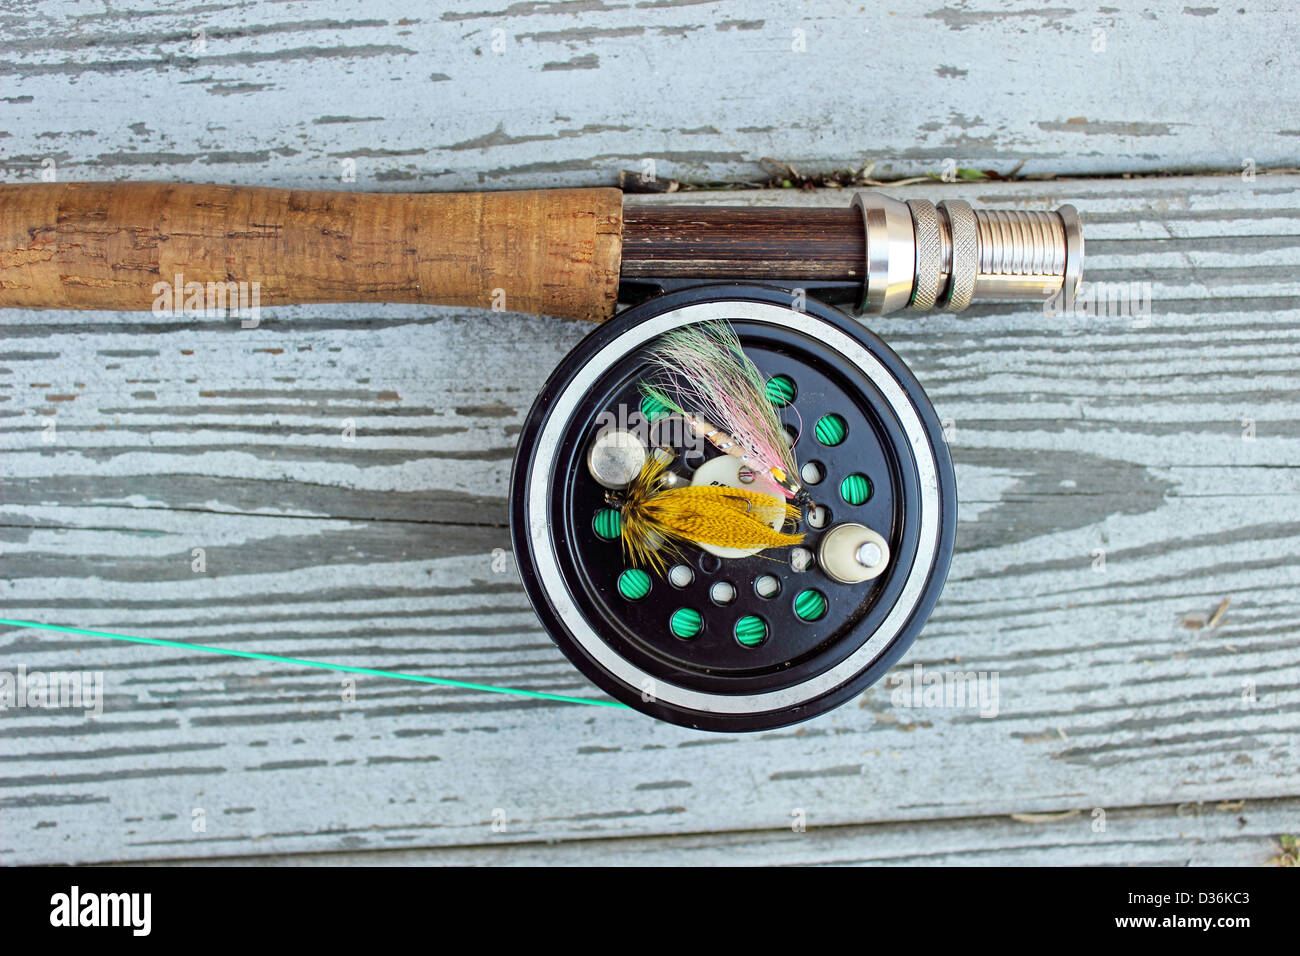 A flyrod and reel rests on a dock Stock Photo - Alamy